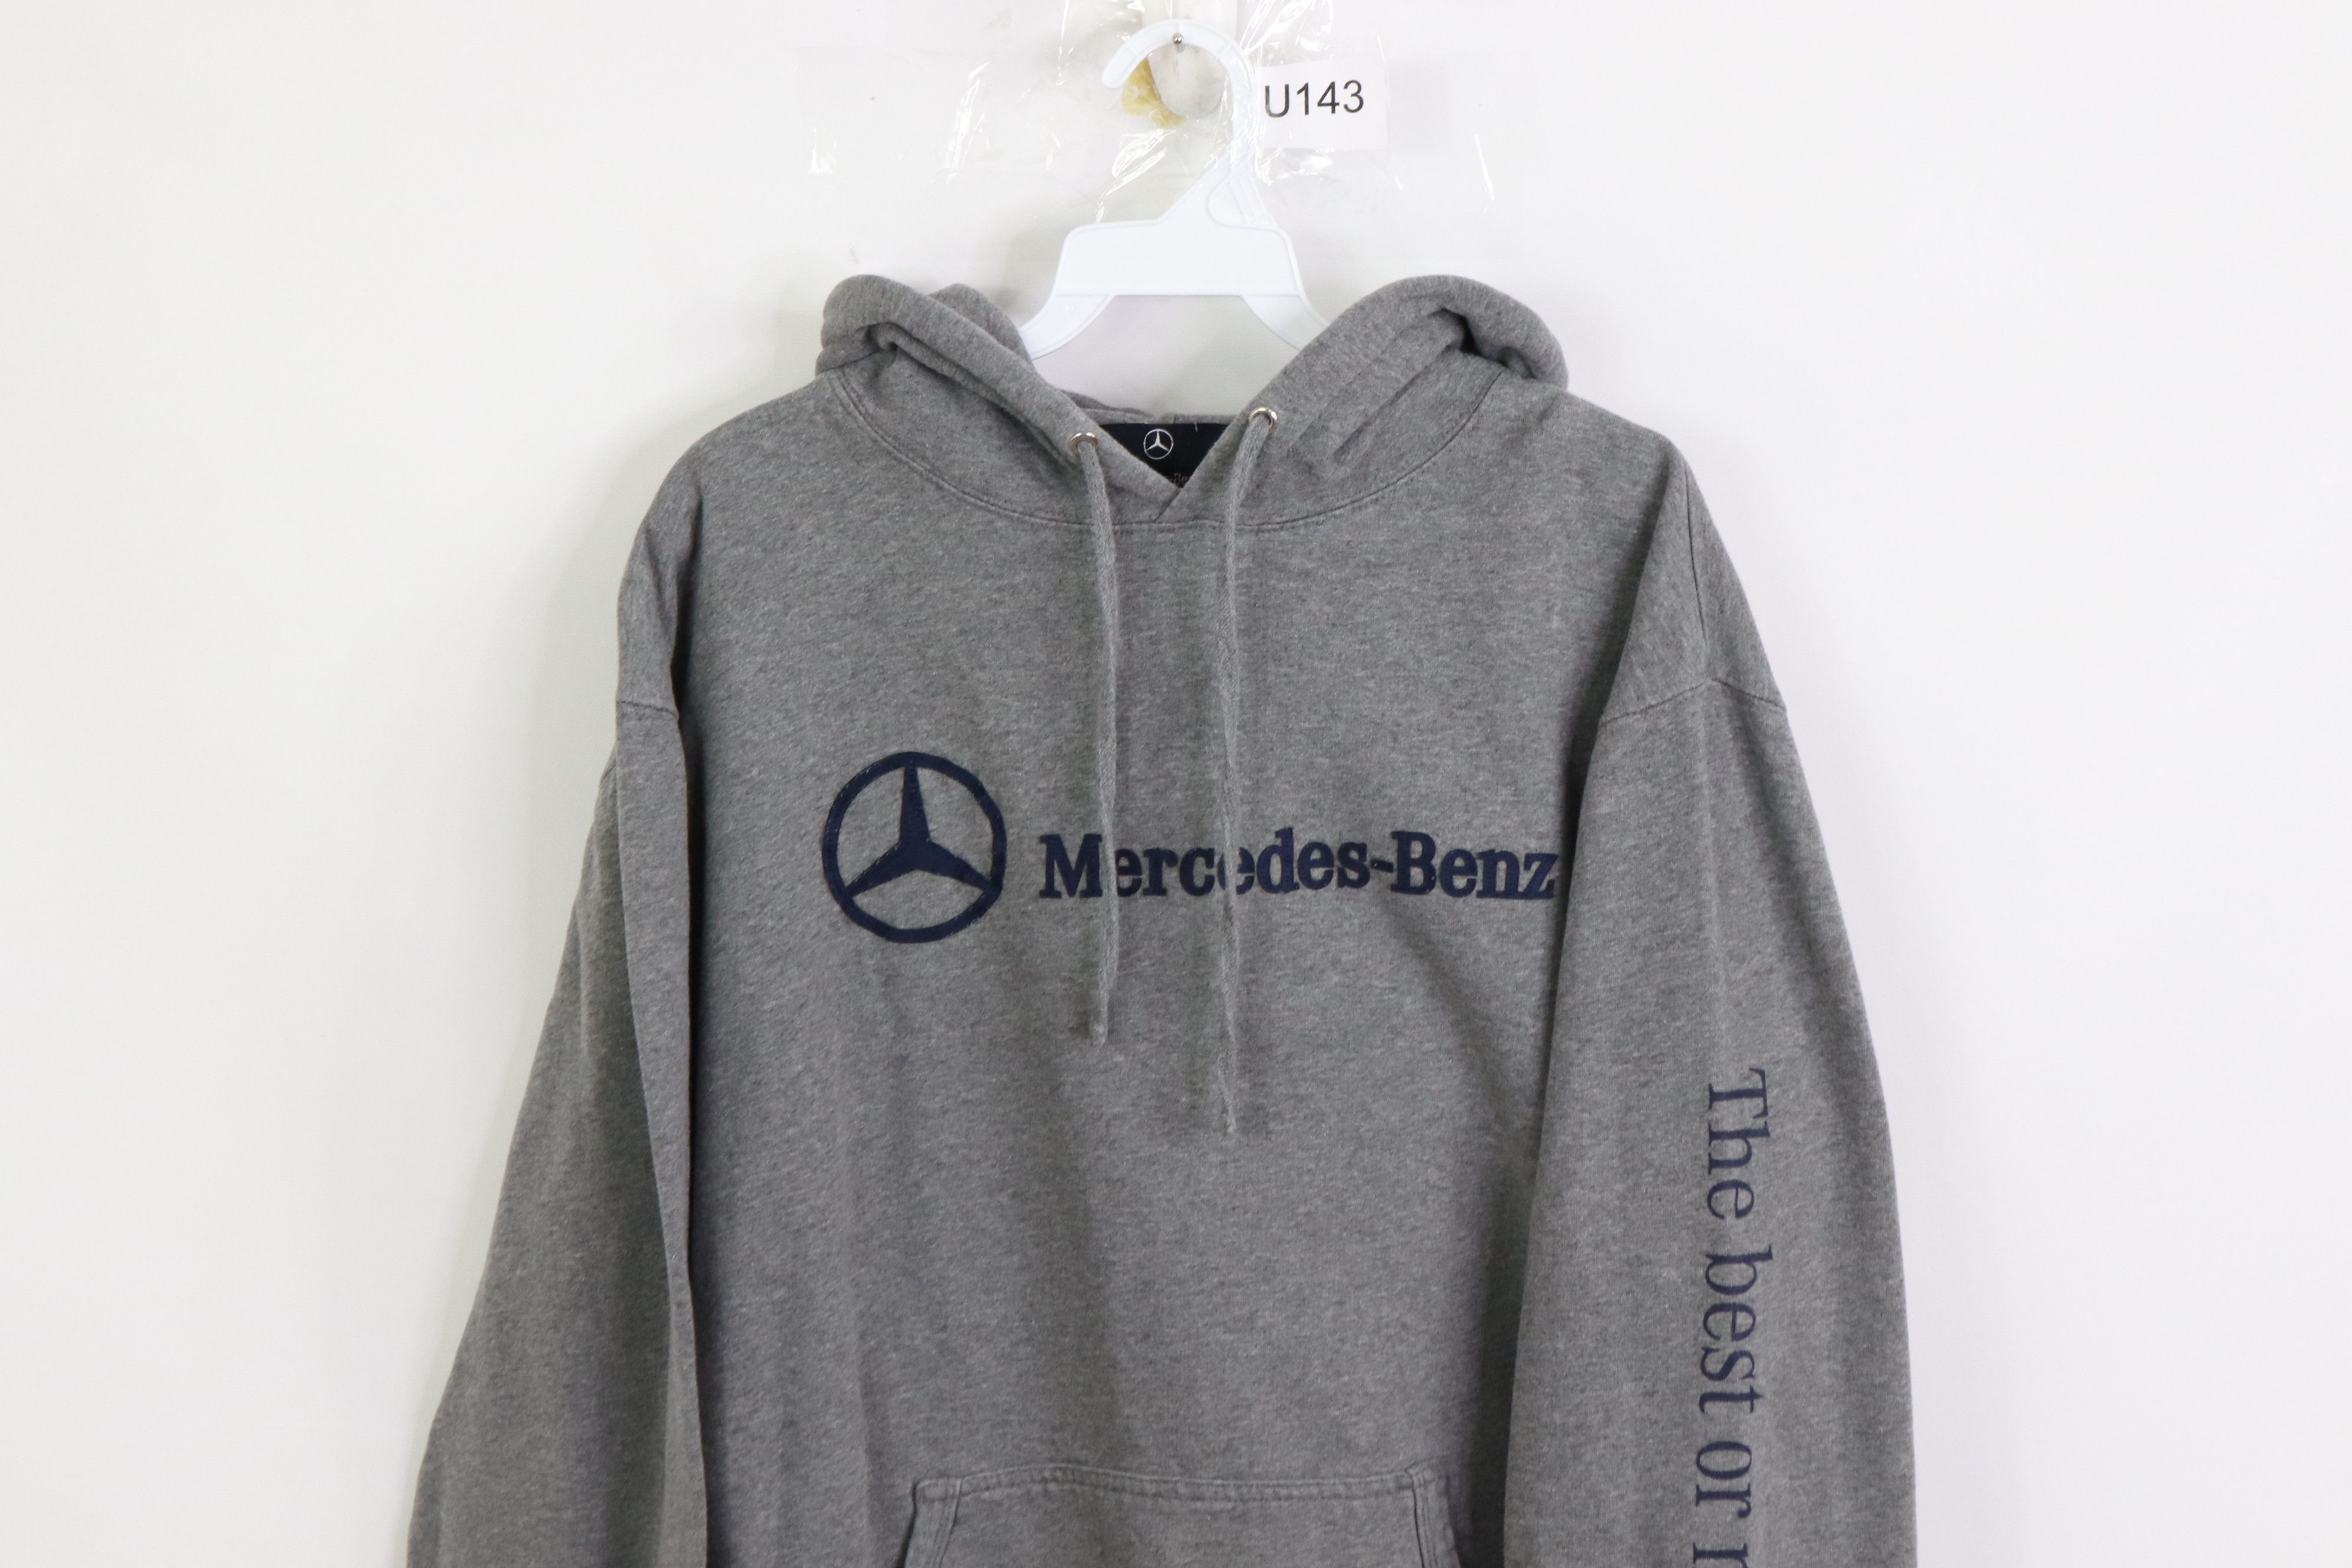 Mercedes Benz Vintage Mercedes Benz Mens XL The Best or Nothing Spell Out Hoodie Sweatshirt Size US XL / EU 56 / 4 - 2 Preview